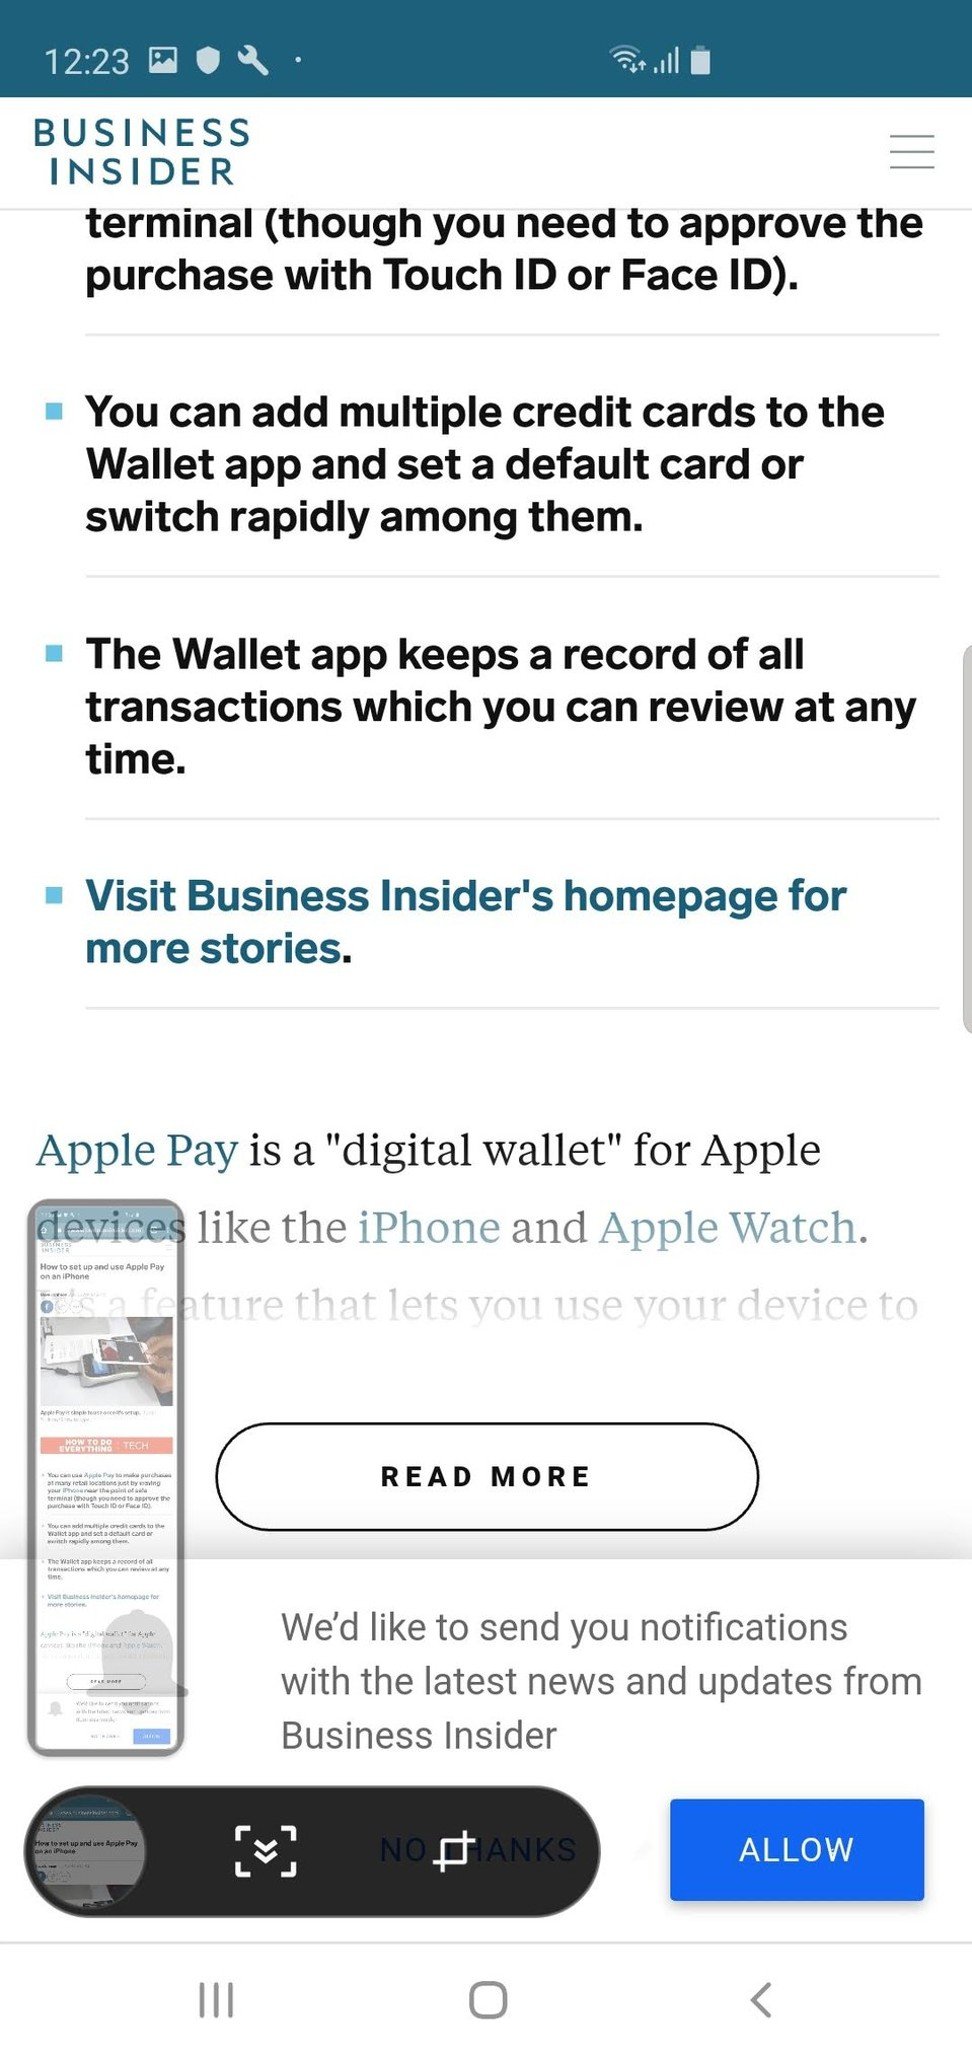 The scrolling capture button lets you make very tall screenshots of lengthy web pages. Photo: Business Insider